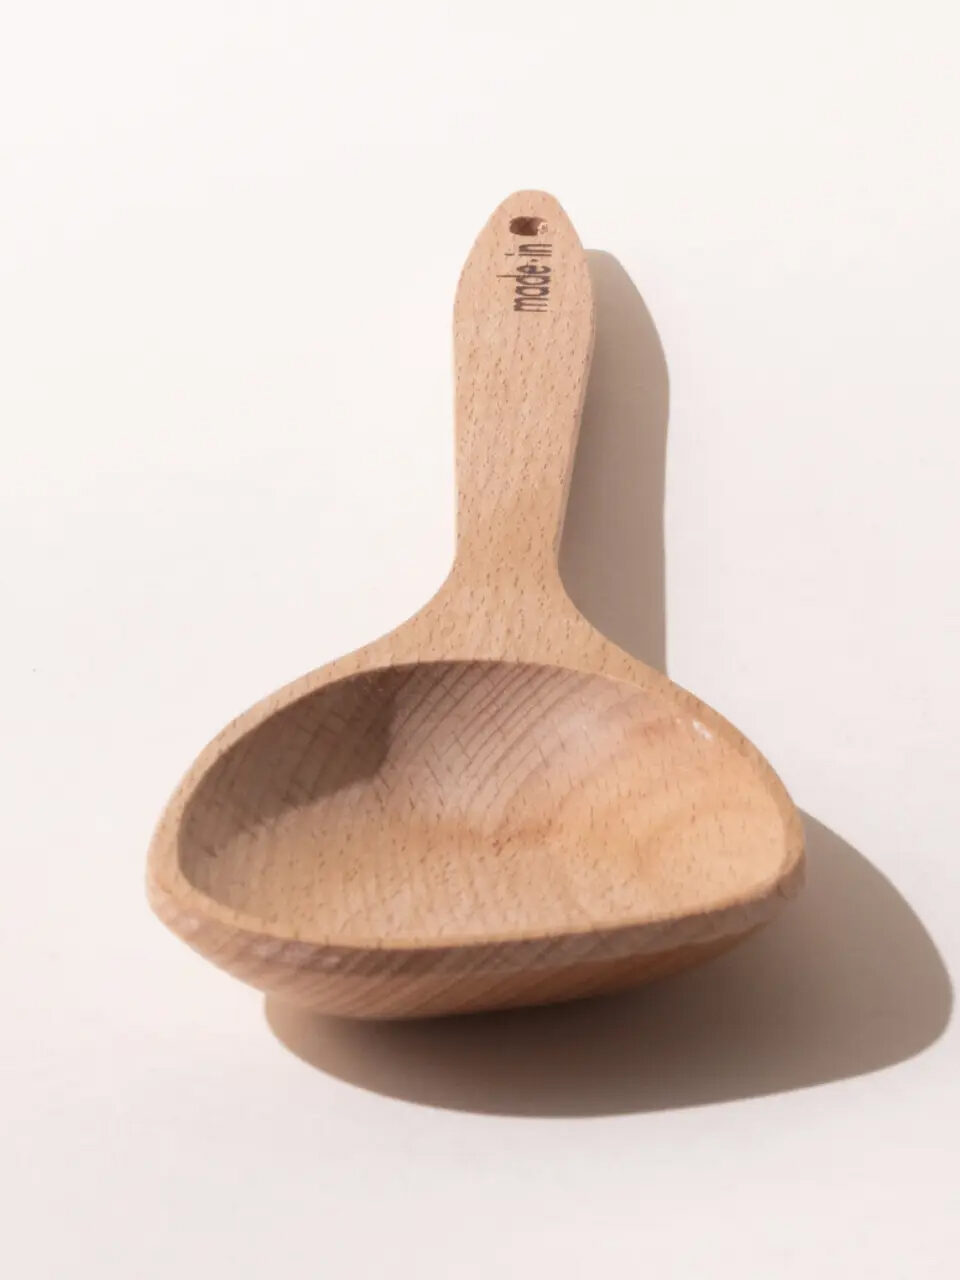 PFAS-Free Wooden Cooking Utensils from Made In